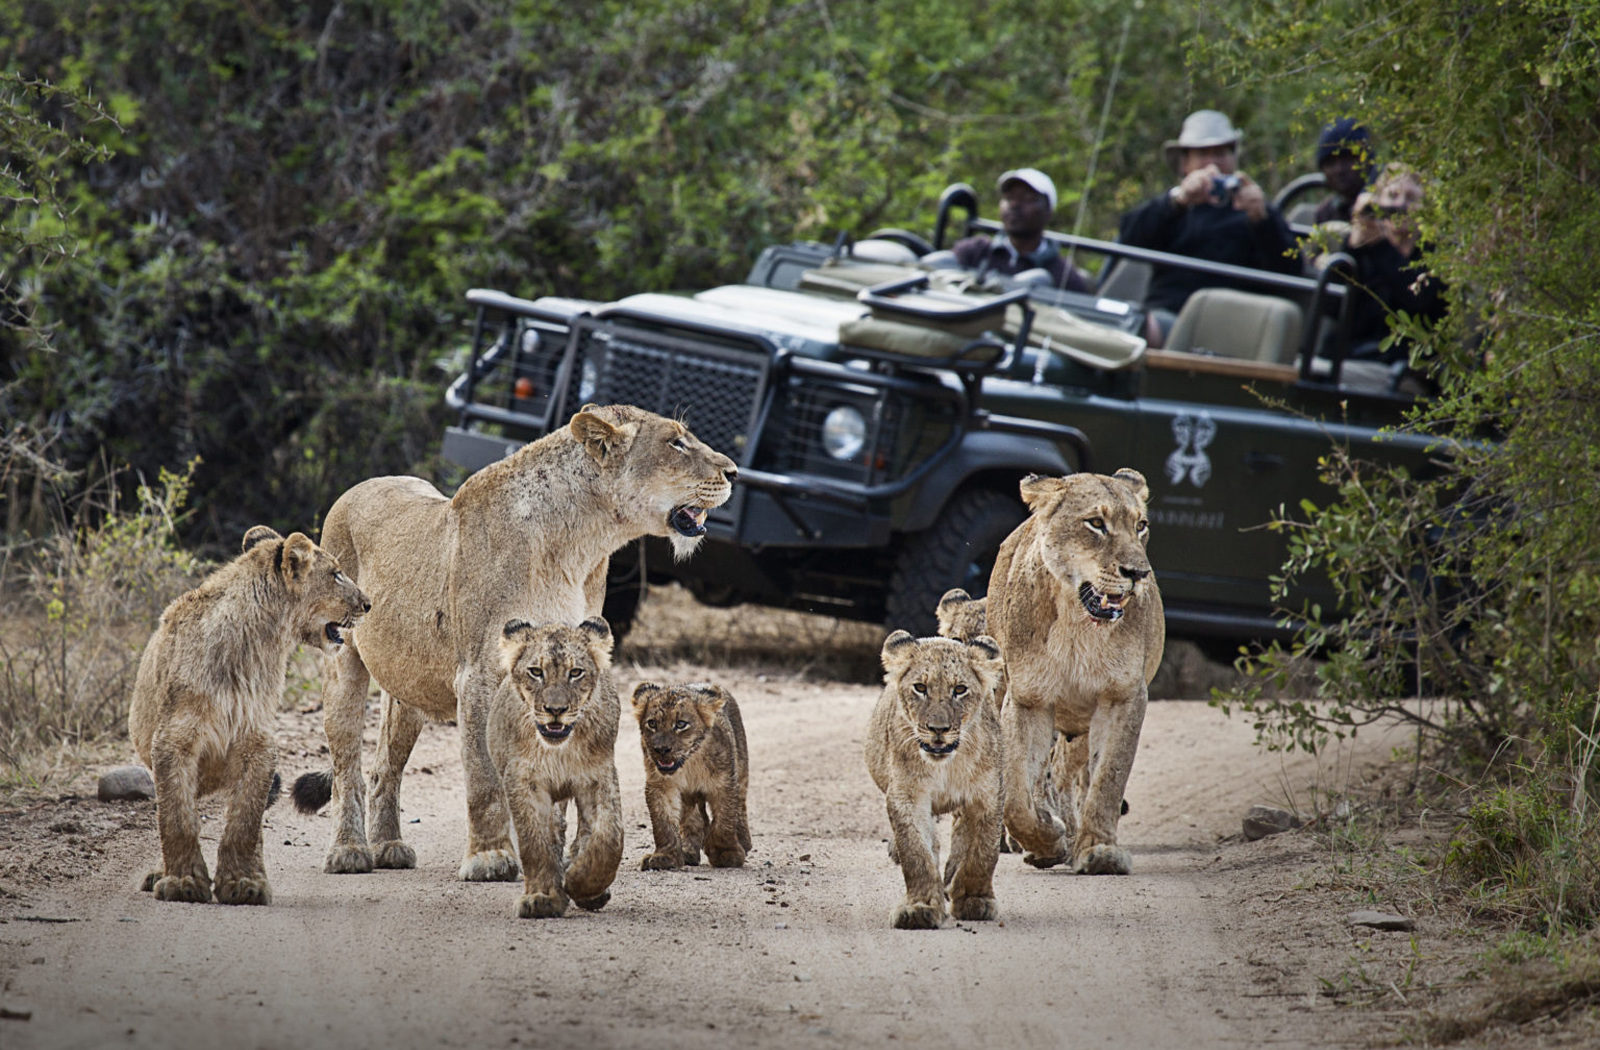 Game Drive at Londolozi Private Game Reserve, Kruger